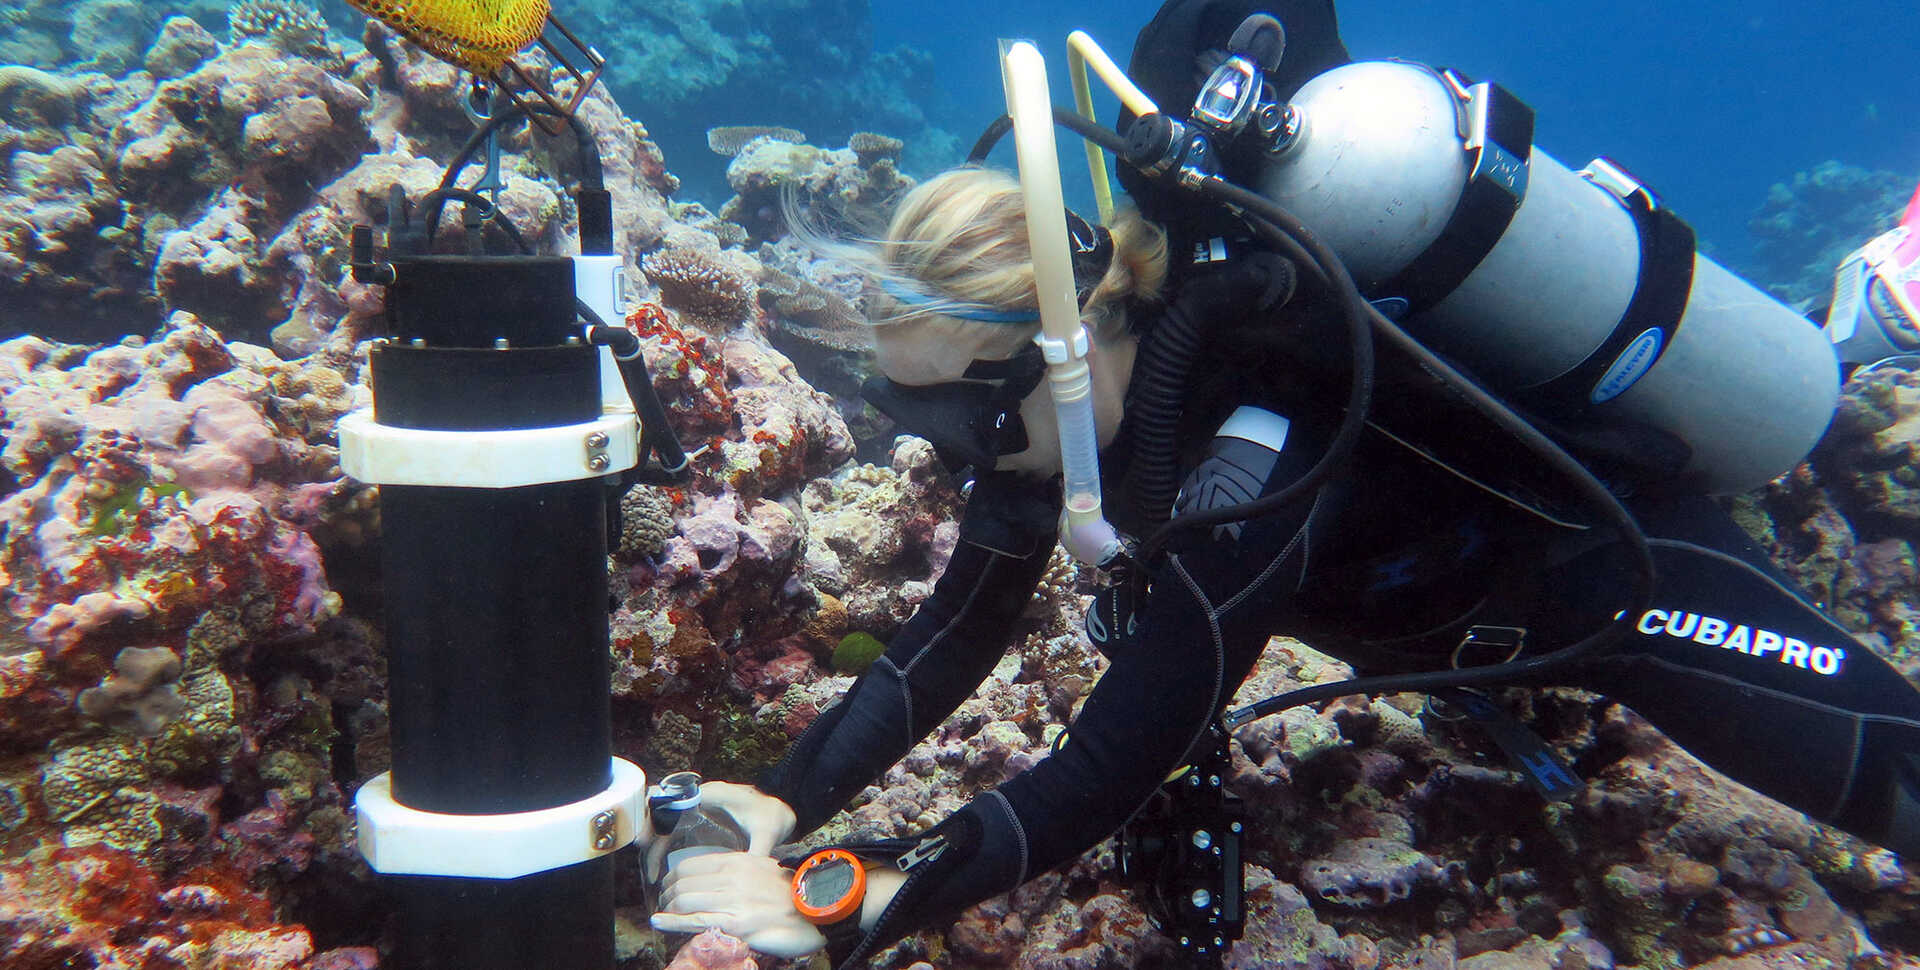 Academy coral reef scientist Rebecca Albright studies a reef in Pohnpei